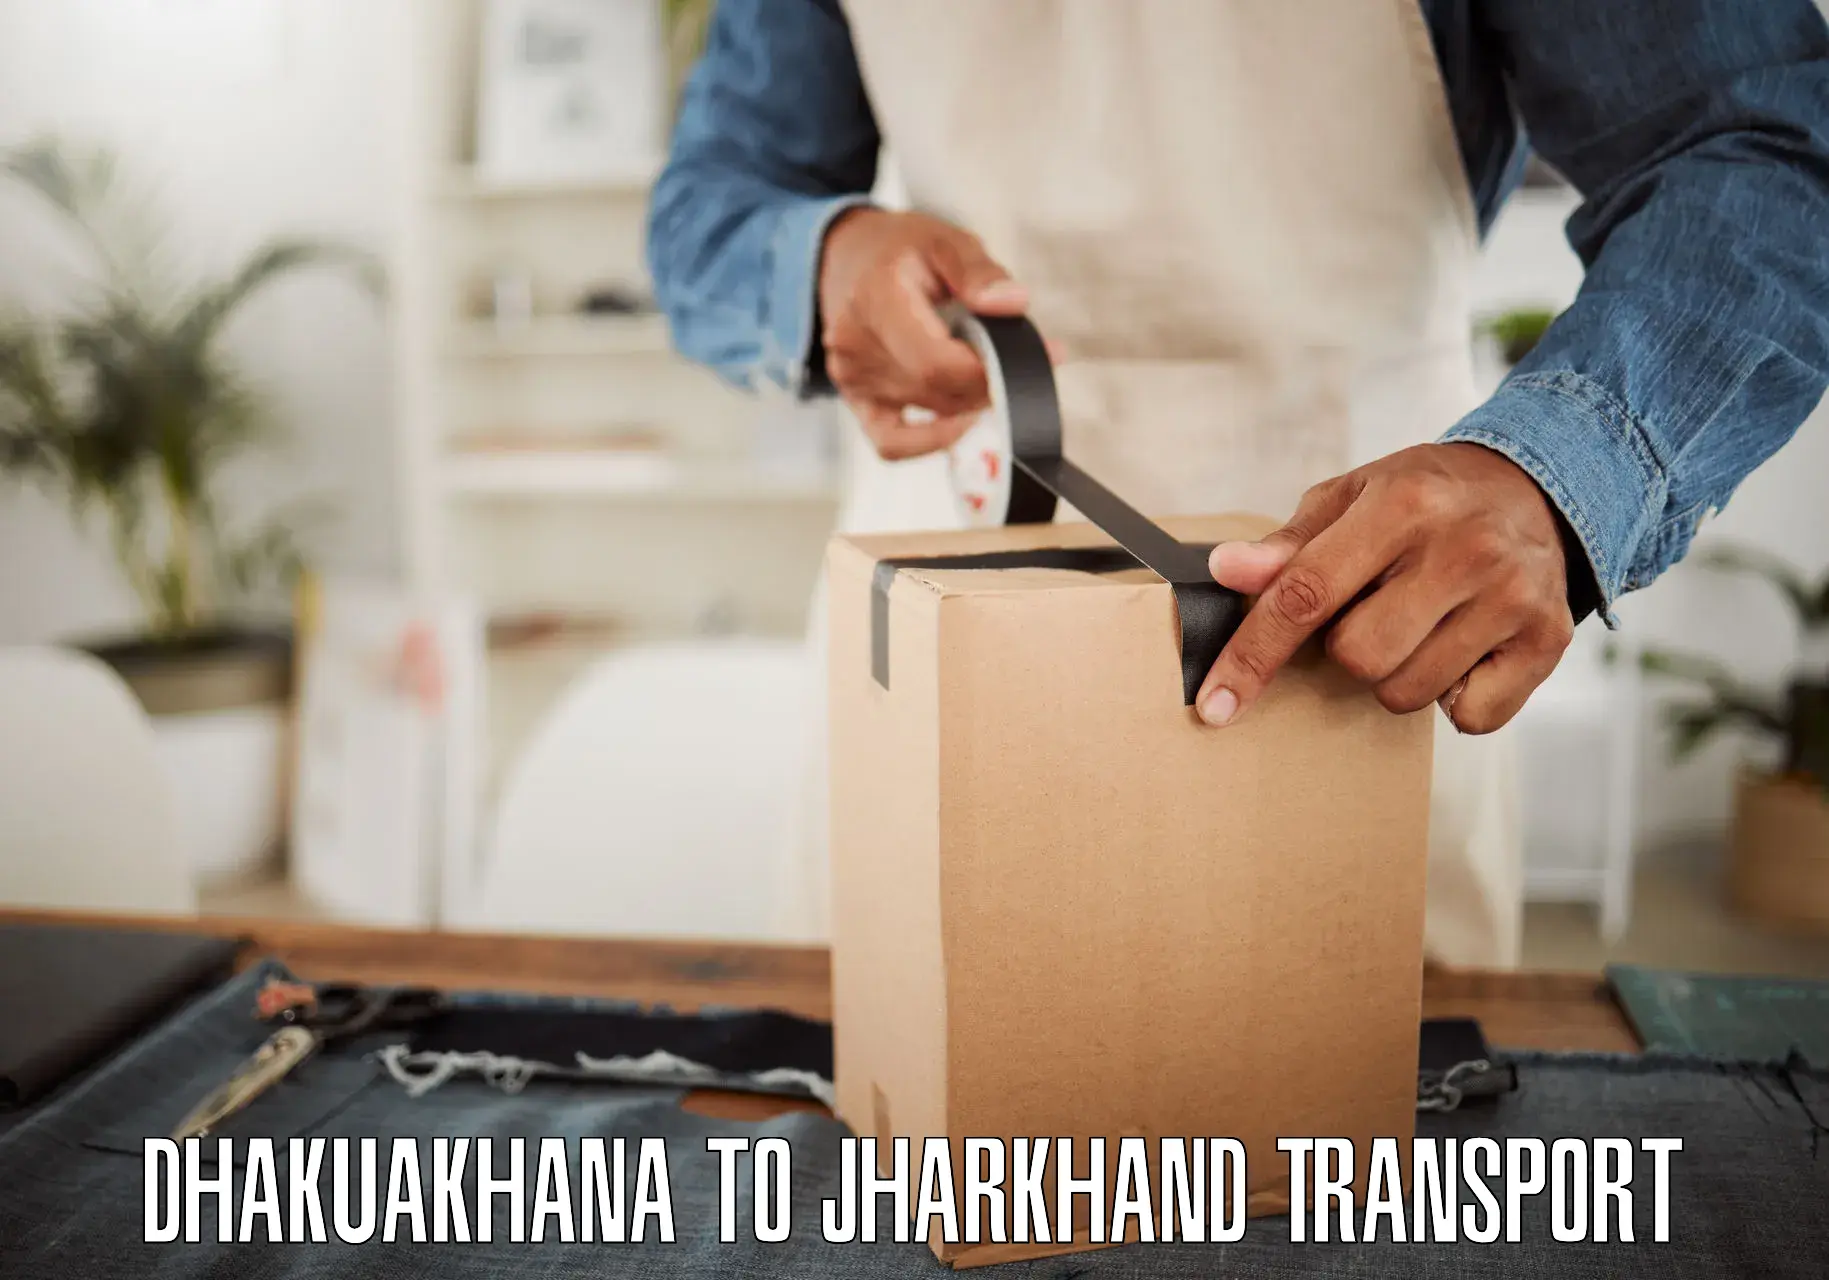 Truck transport companies in India Dhakuakhana to Deoghar